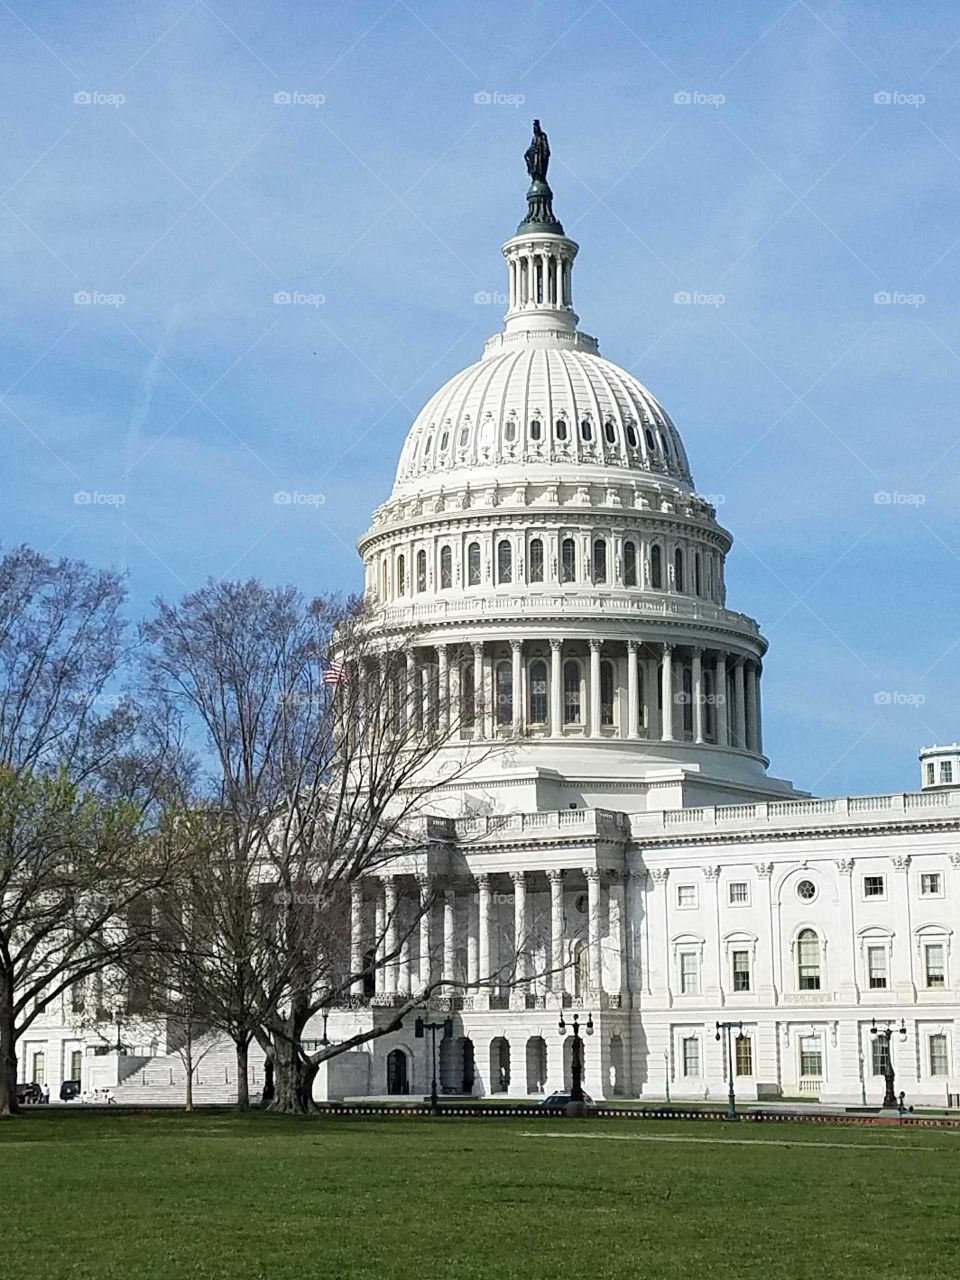 The United States Capitol building on a sunny day in Washington, DC. Photo taken April 2018.